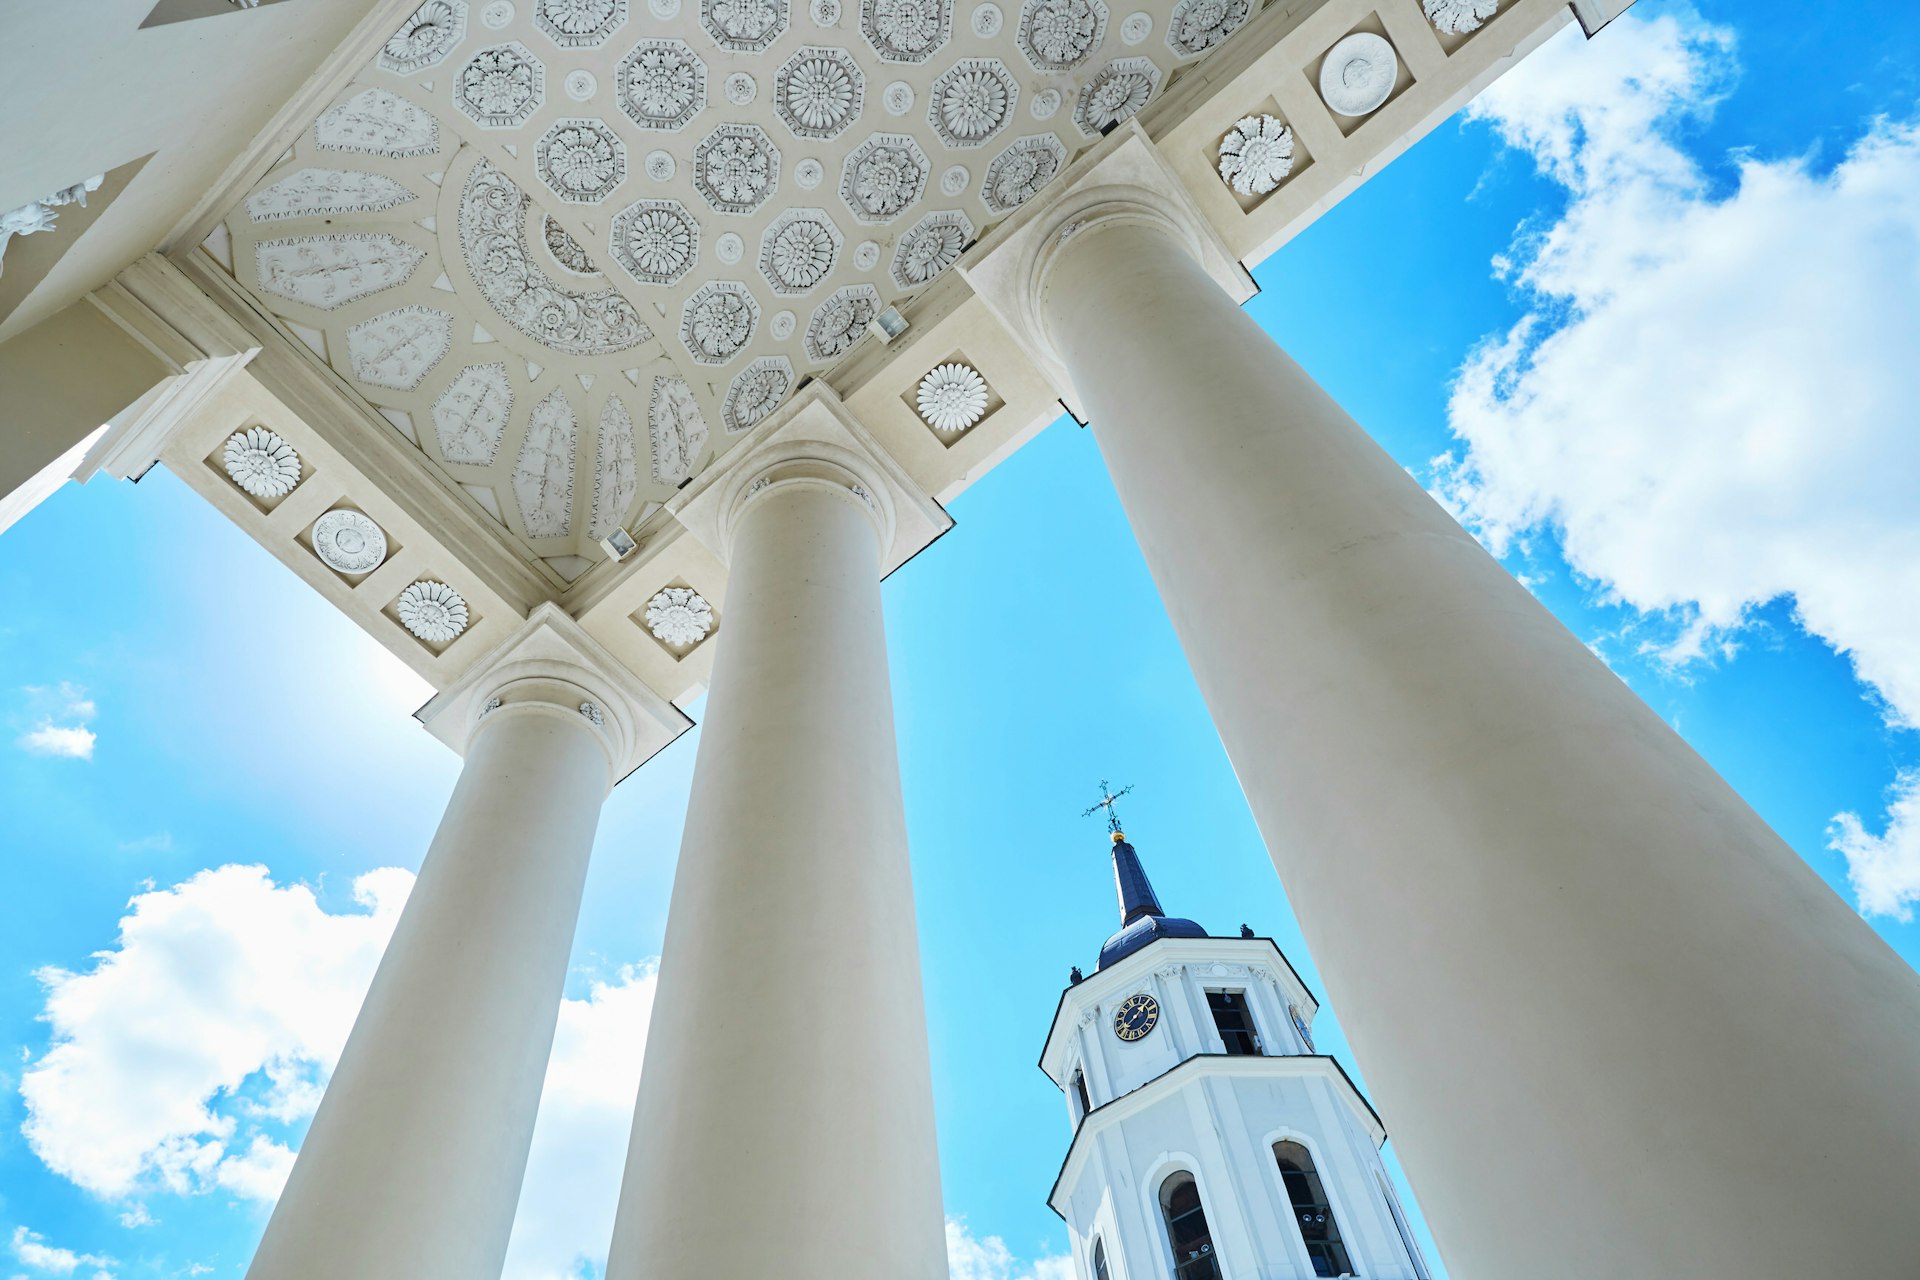 Bell tower of Vilnius cathedral over the blue sky with clouds © Ekaterina Pokrovsky / Shutterstock